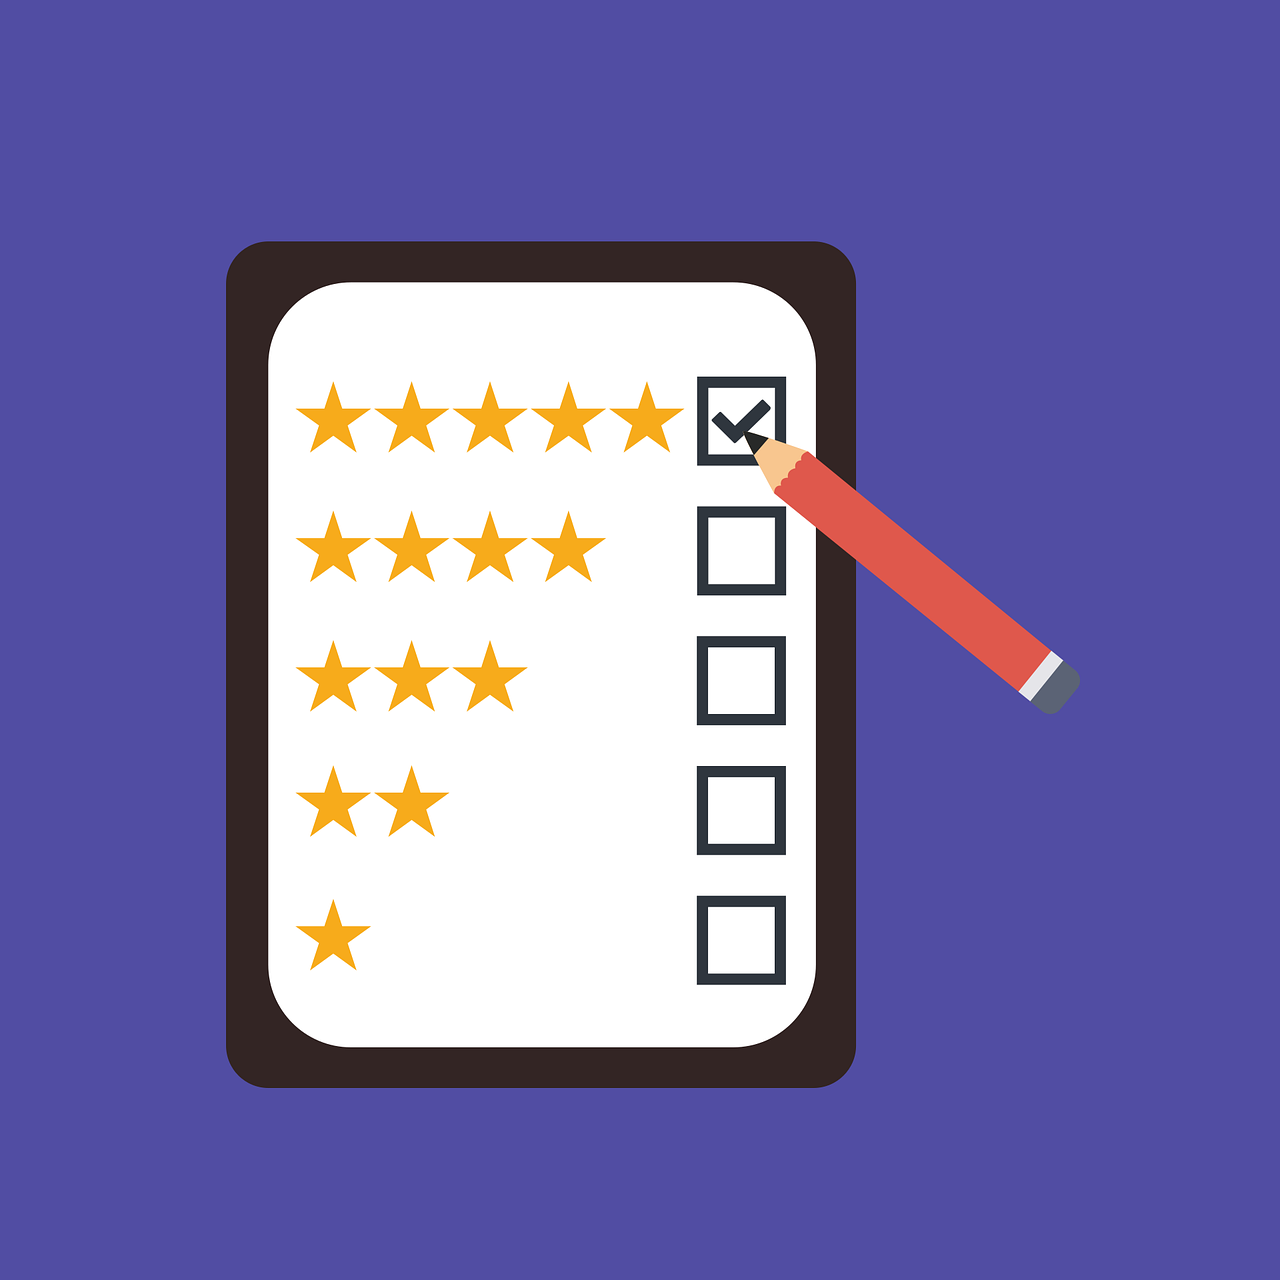 illustration of a survey-- rows of 5, 4, 3, 2, and 1 stars, with a pencil checking the "5 star" rating